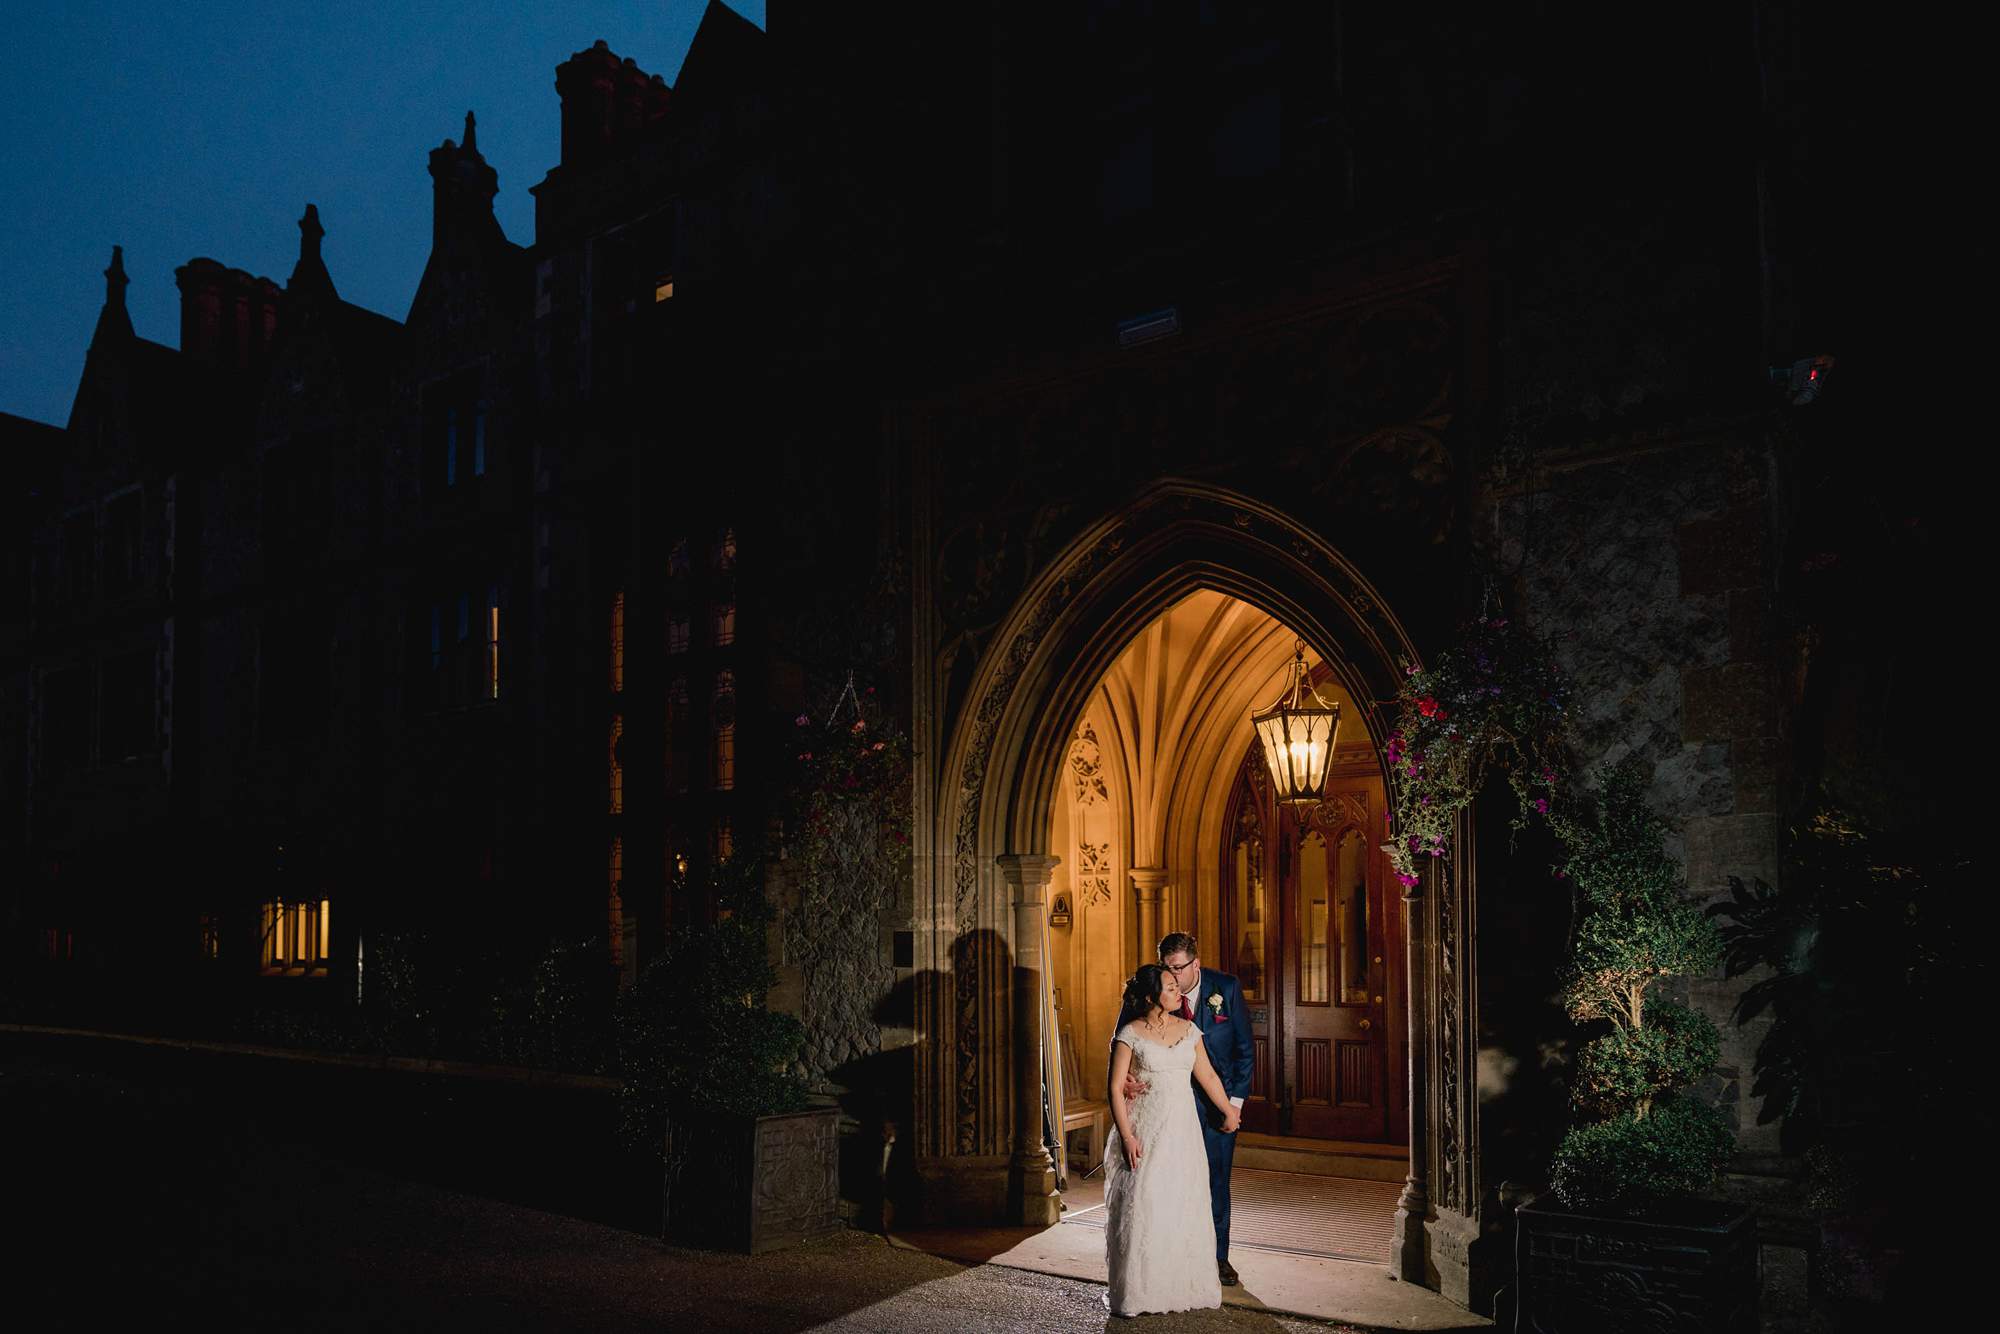 Bride and groom on their wedding day at Nutfield Priory in Surrey